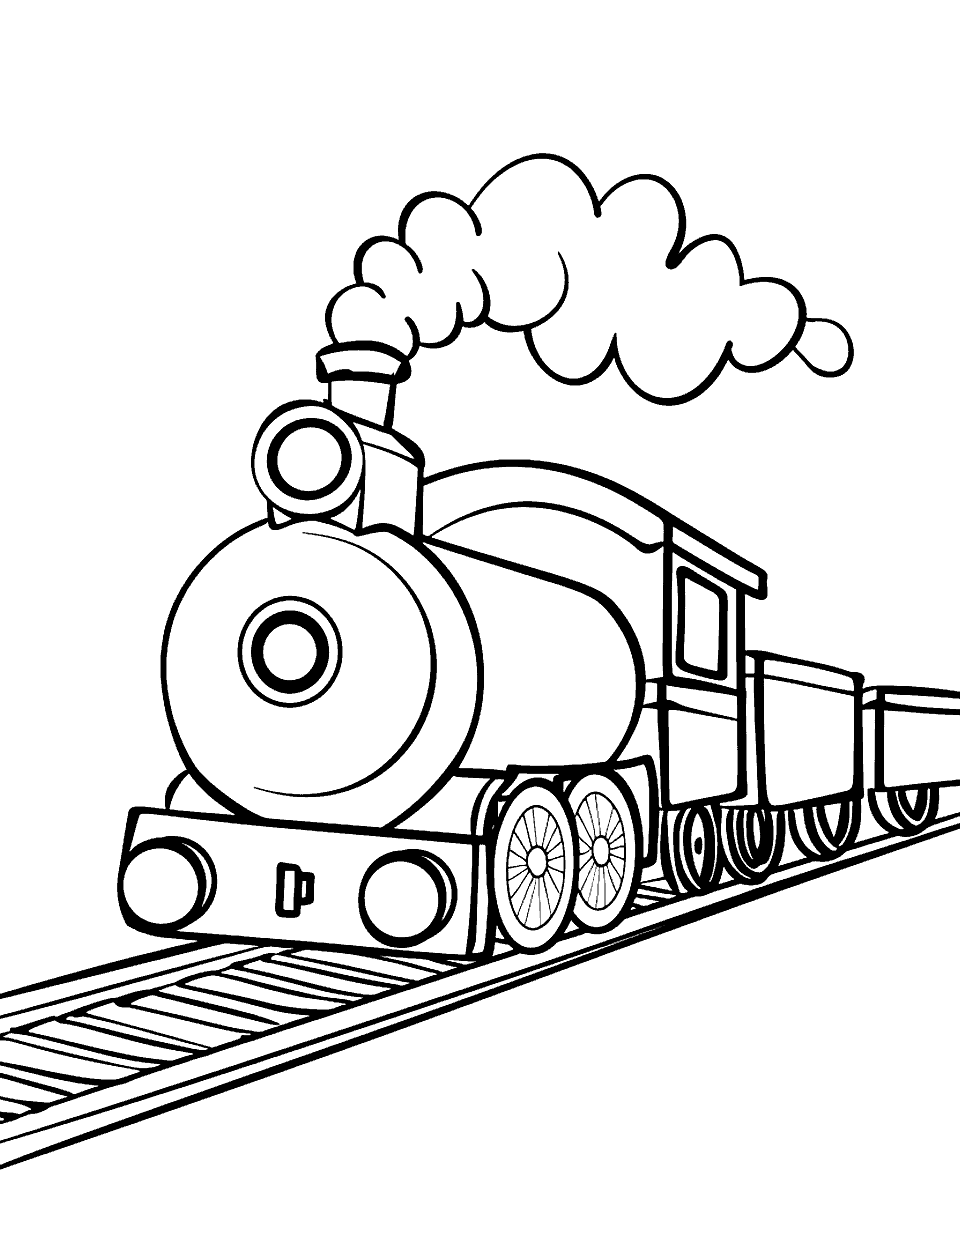 Train Ride Coloring Page - A simple steam train on the track.